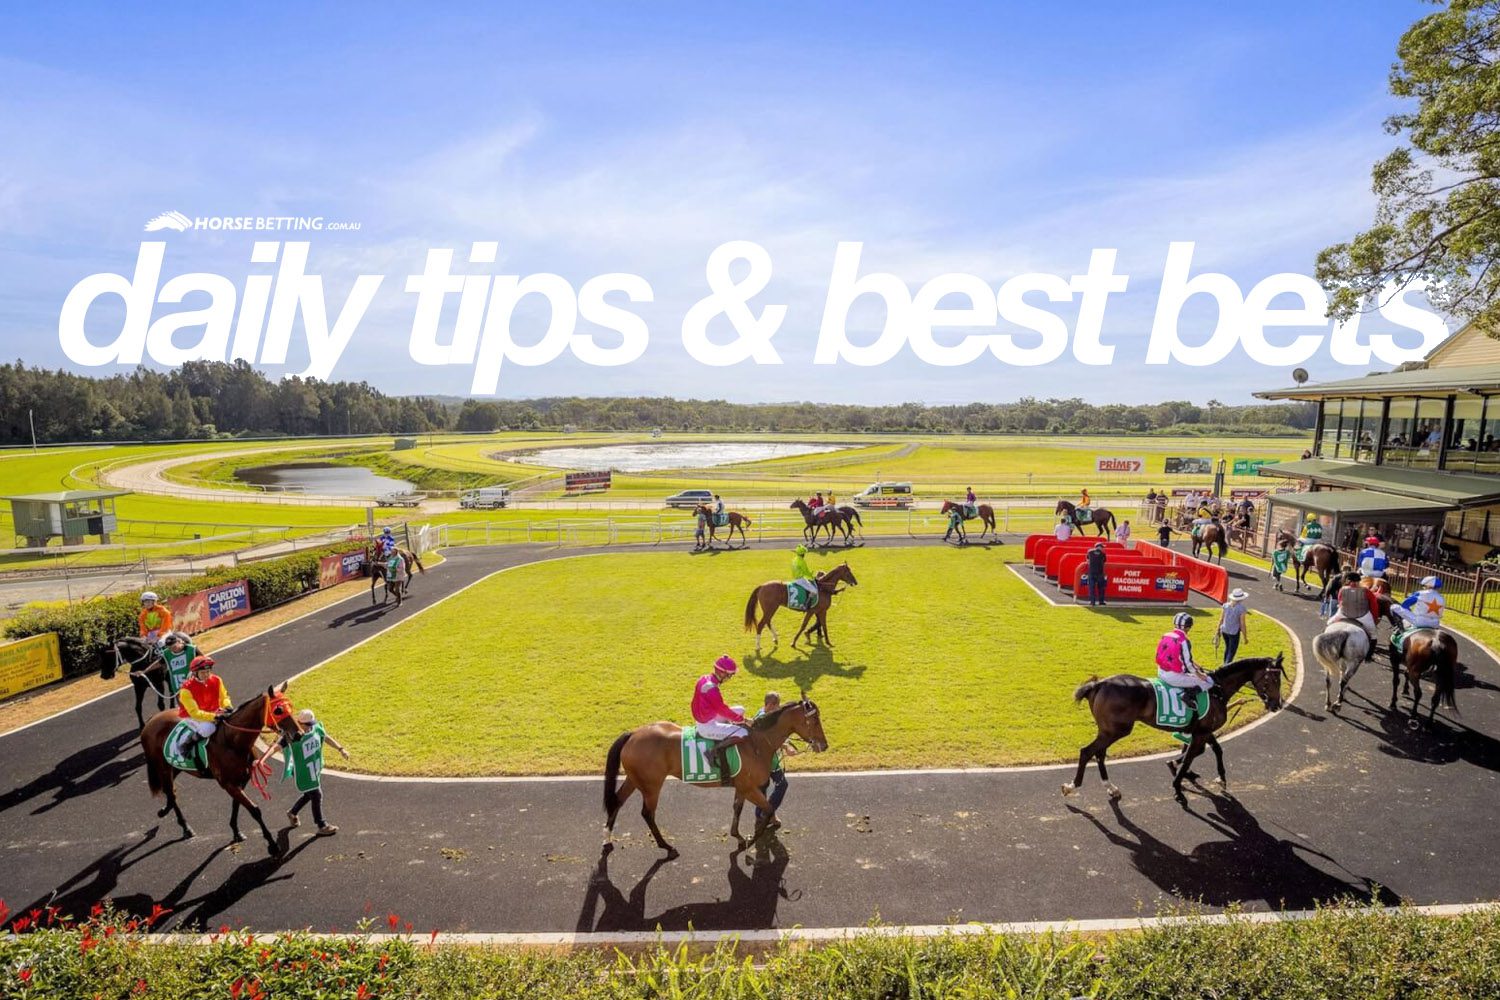 Today's Horse Tips & Best Bets | October 7, 2022